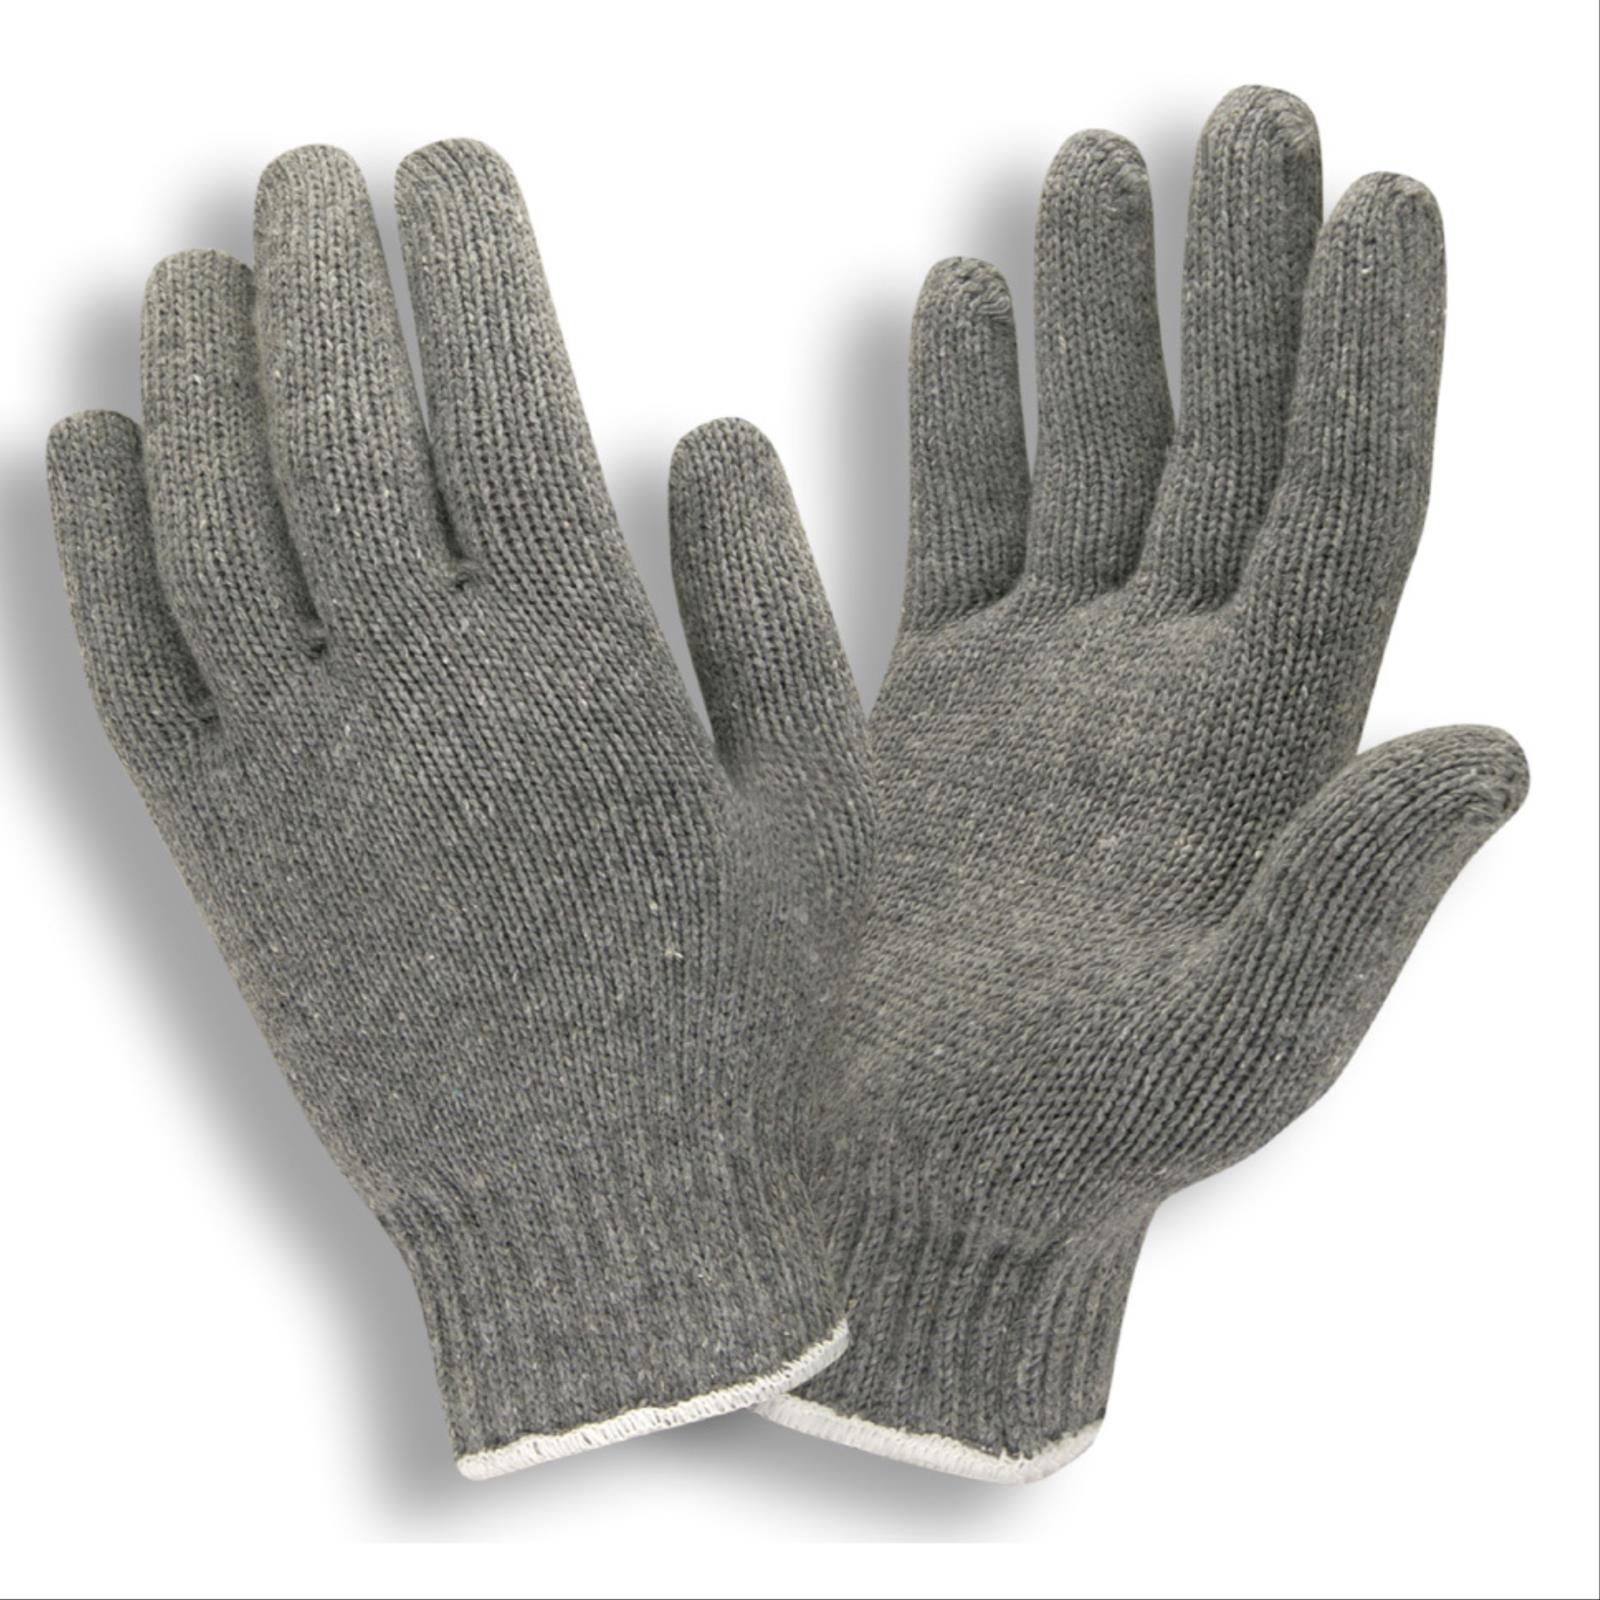 Heavy Weight Cotton/Polyester String Knit Gloves